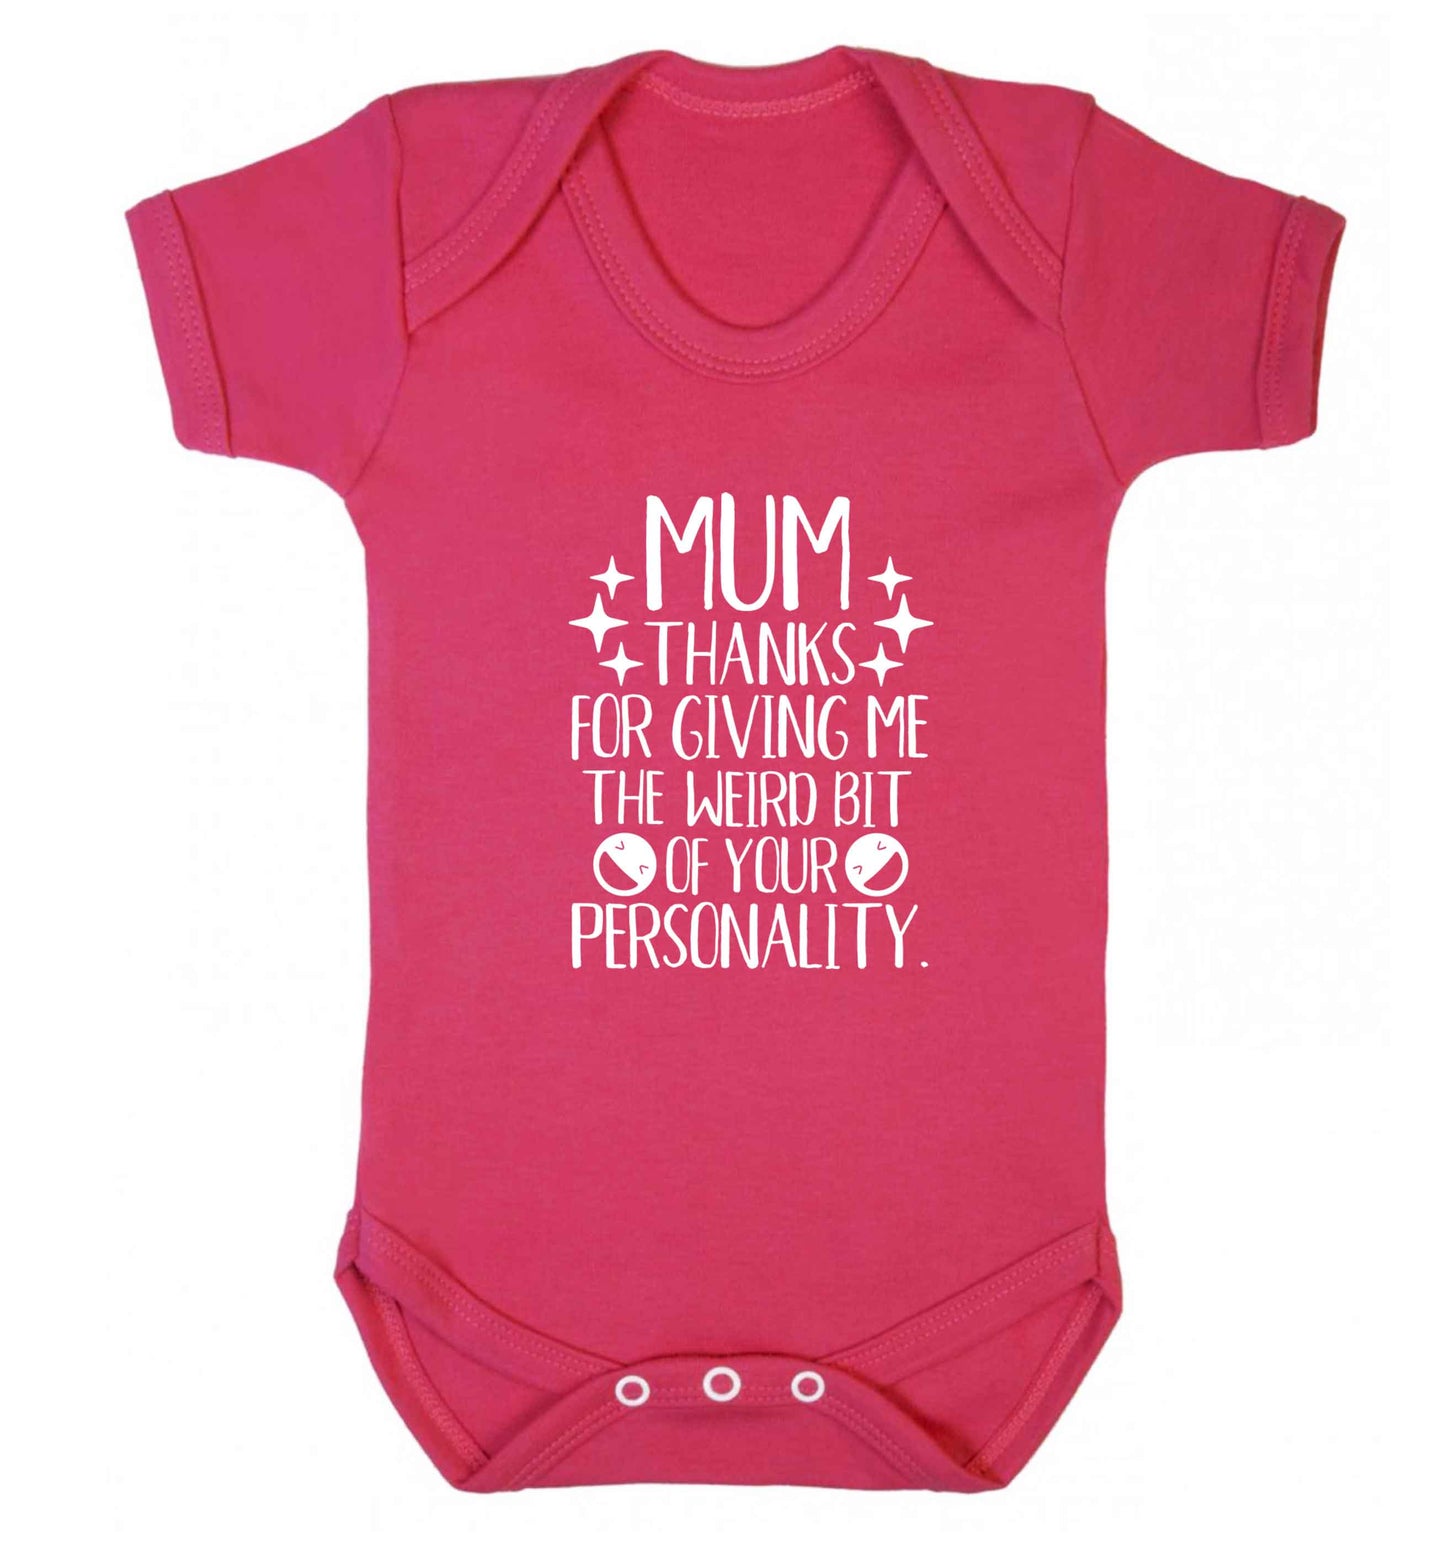 Mum, I love you more than halloumi and if you know me at all you know how deep that is baby vest dark pink 18-24 months